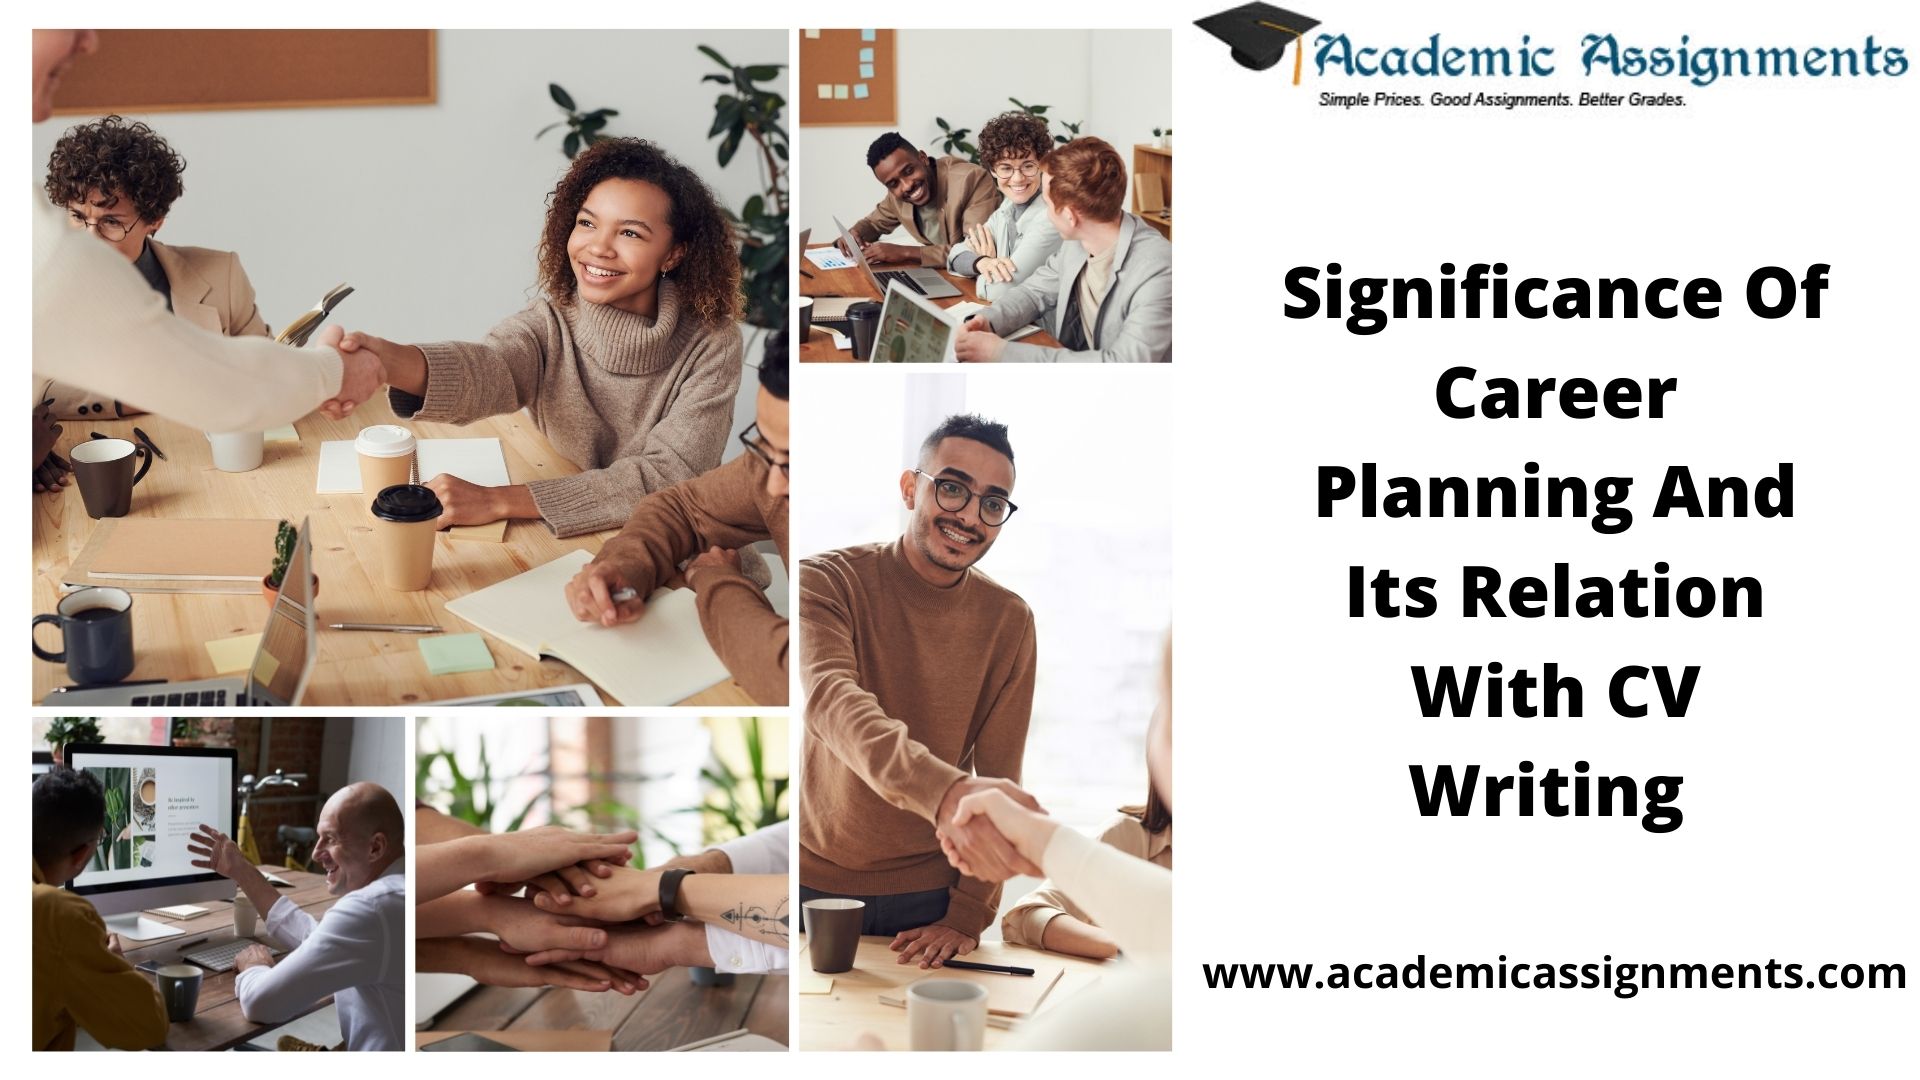 Significance Of Career Planning And Its Relation With CV Writing